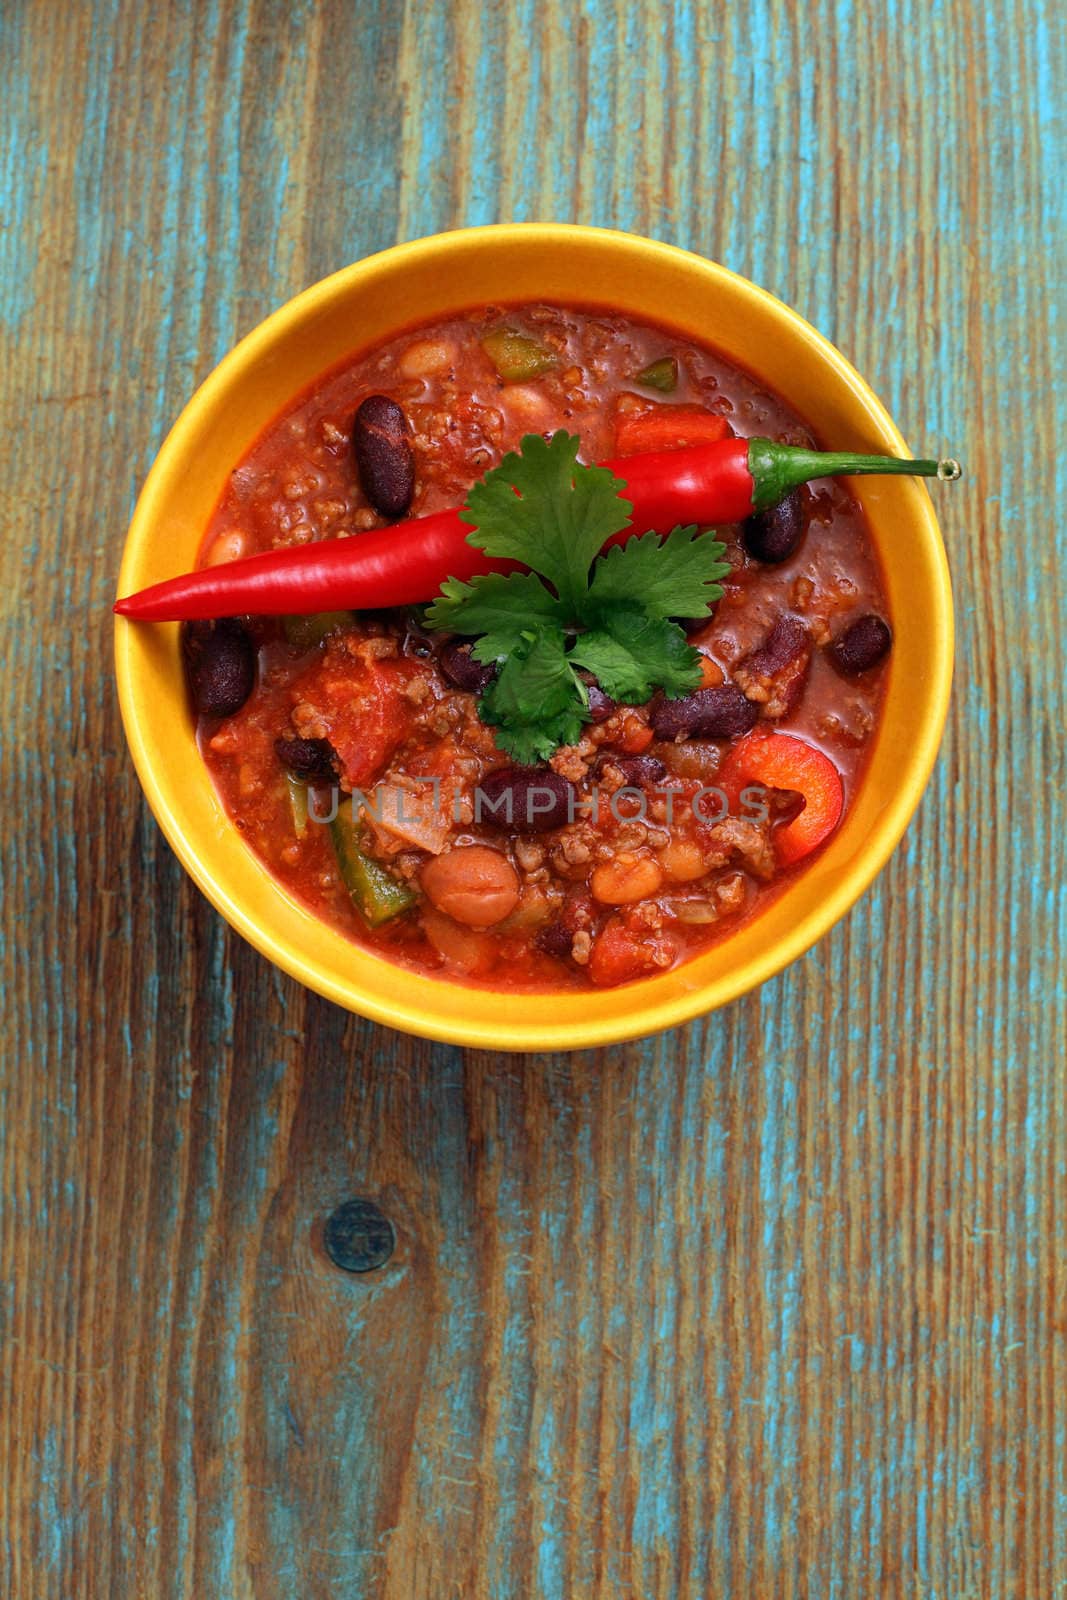 Photo of a bowl of chili resting on an old wood table.